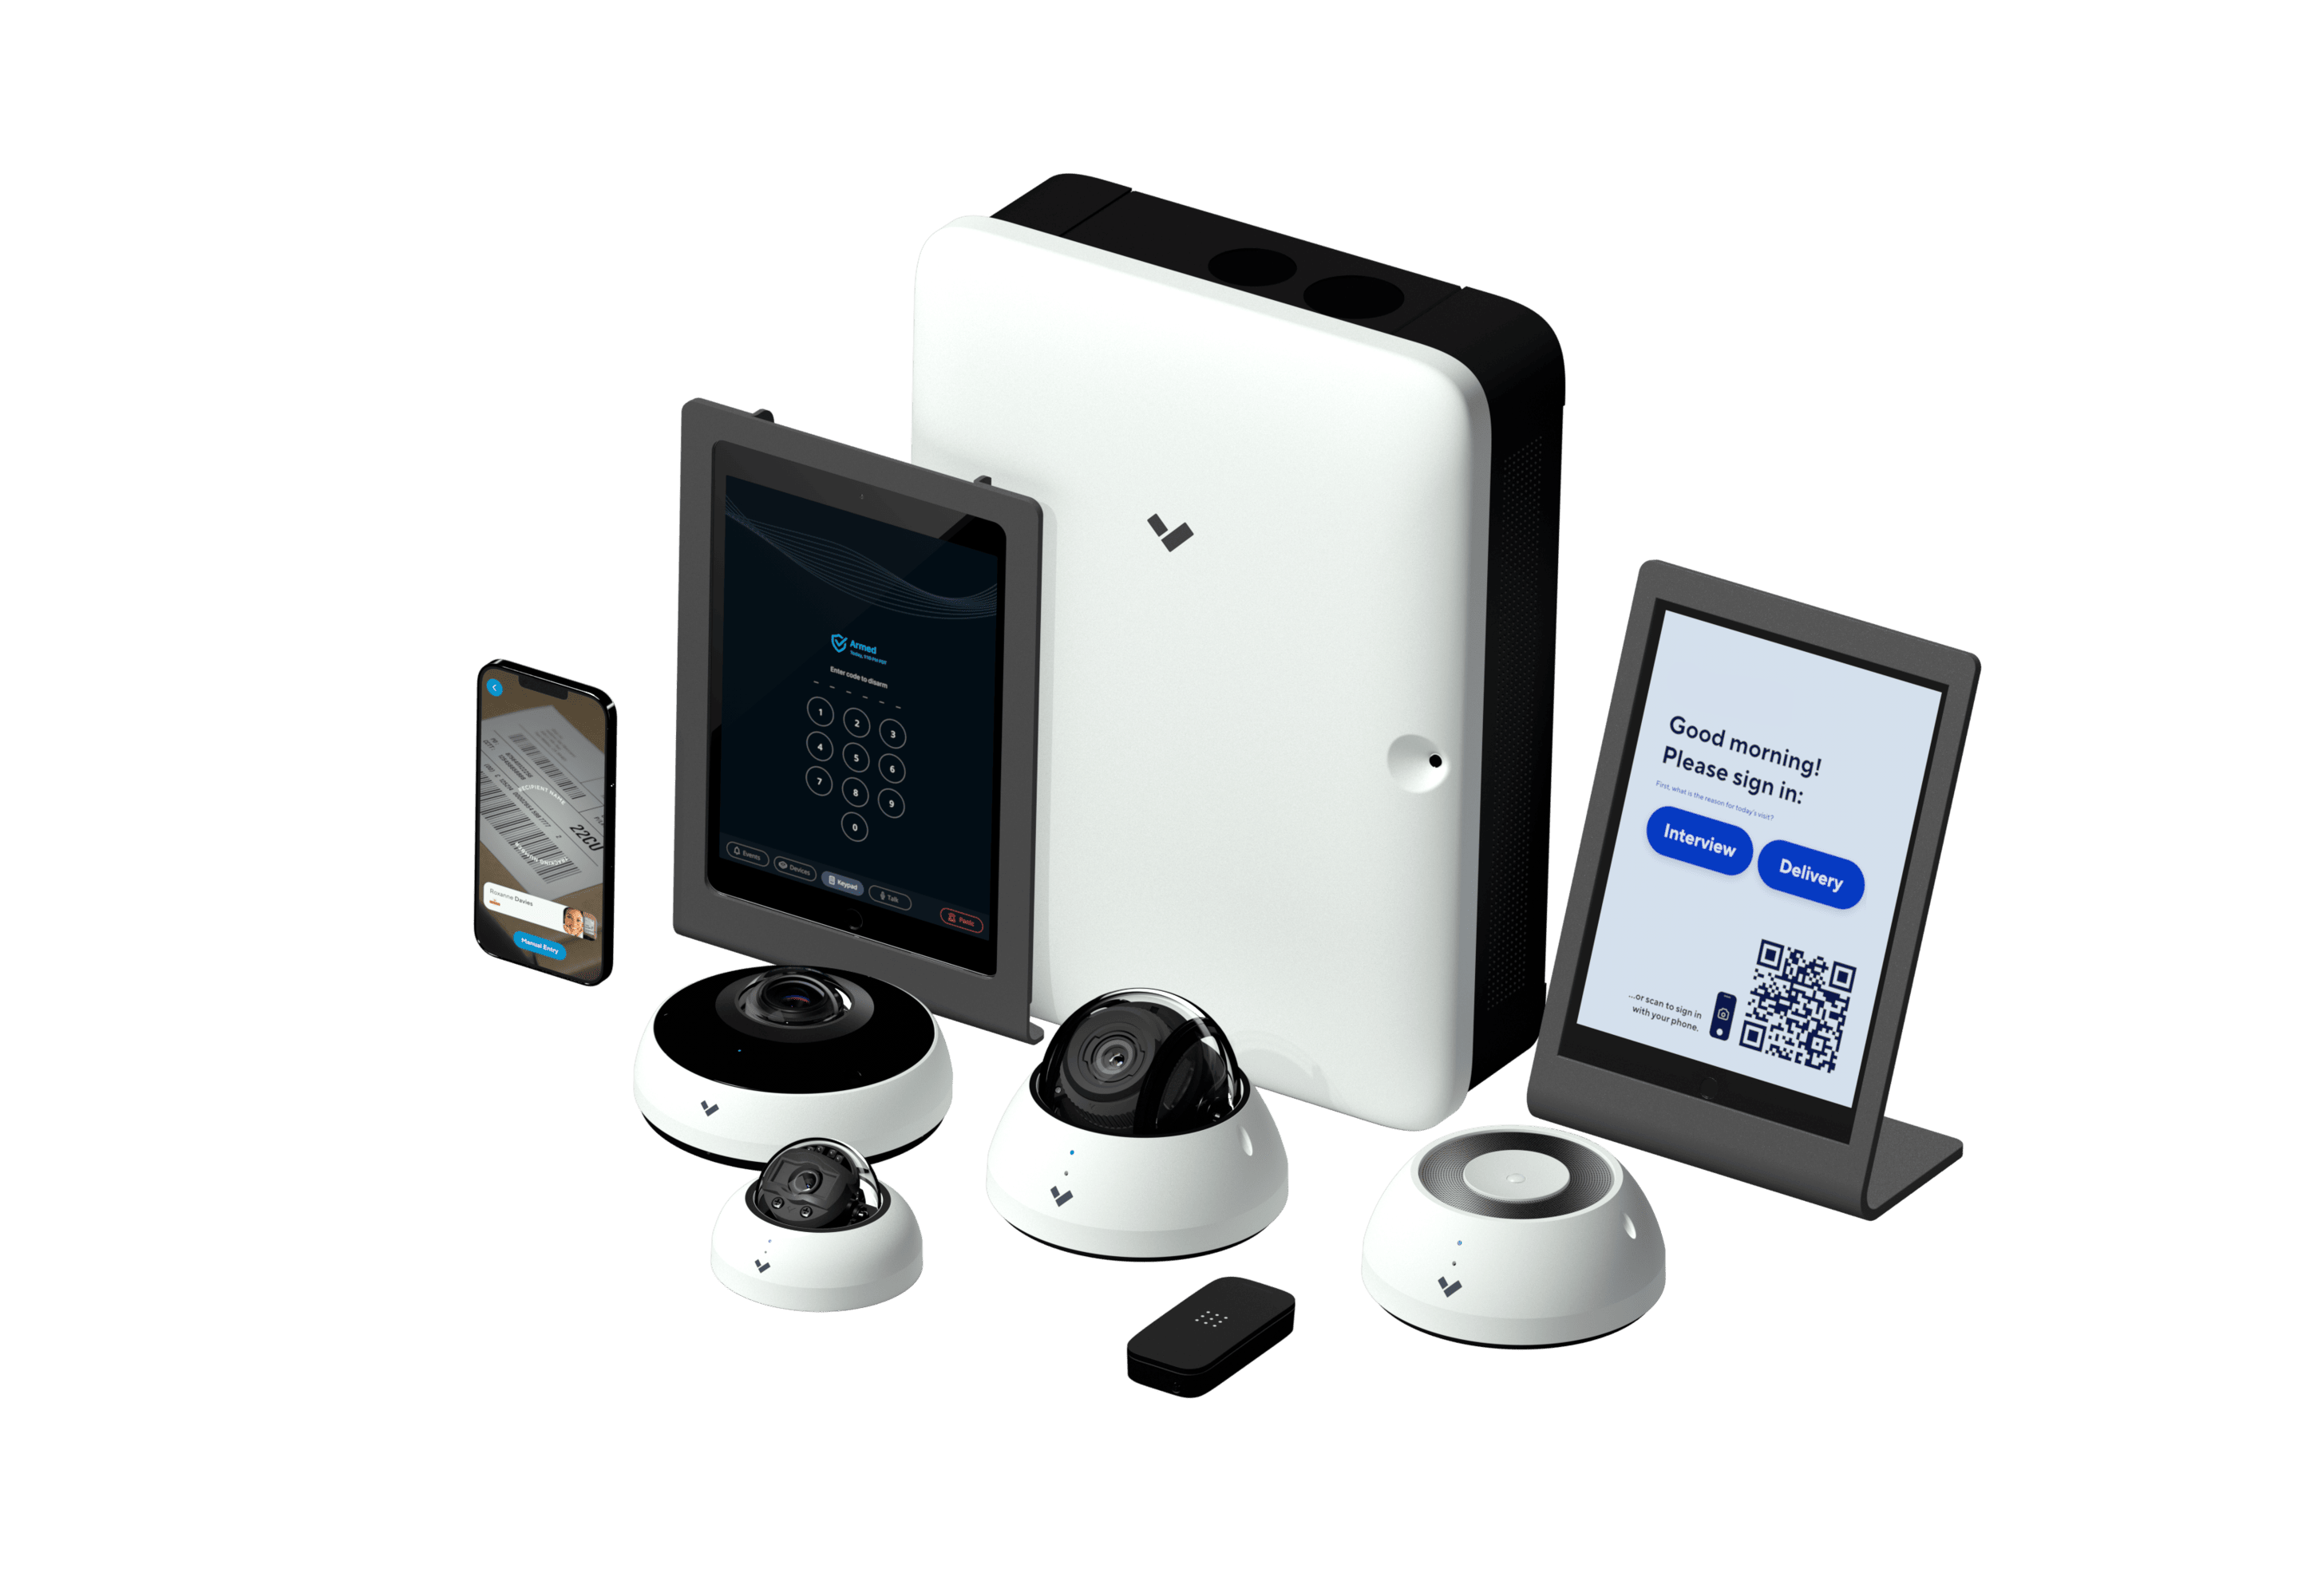 Verkada device family for surveillance camera systems for businesses in Salt Lake City